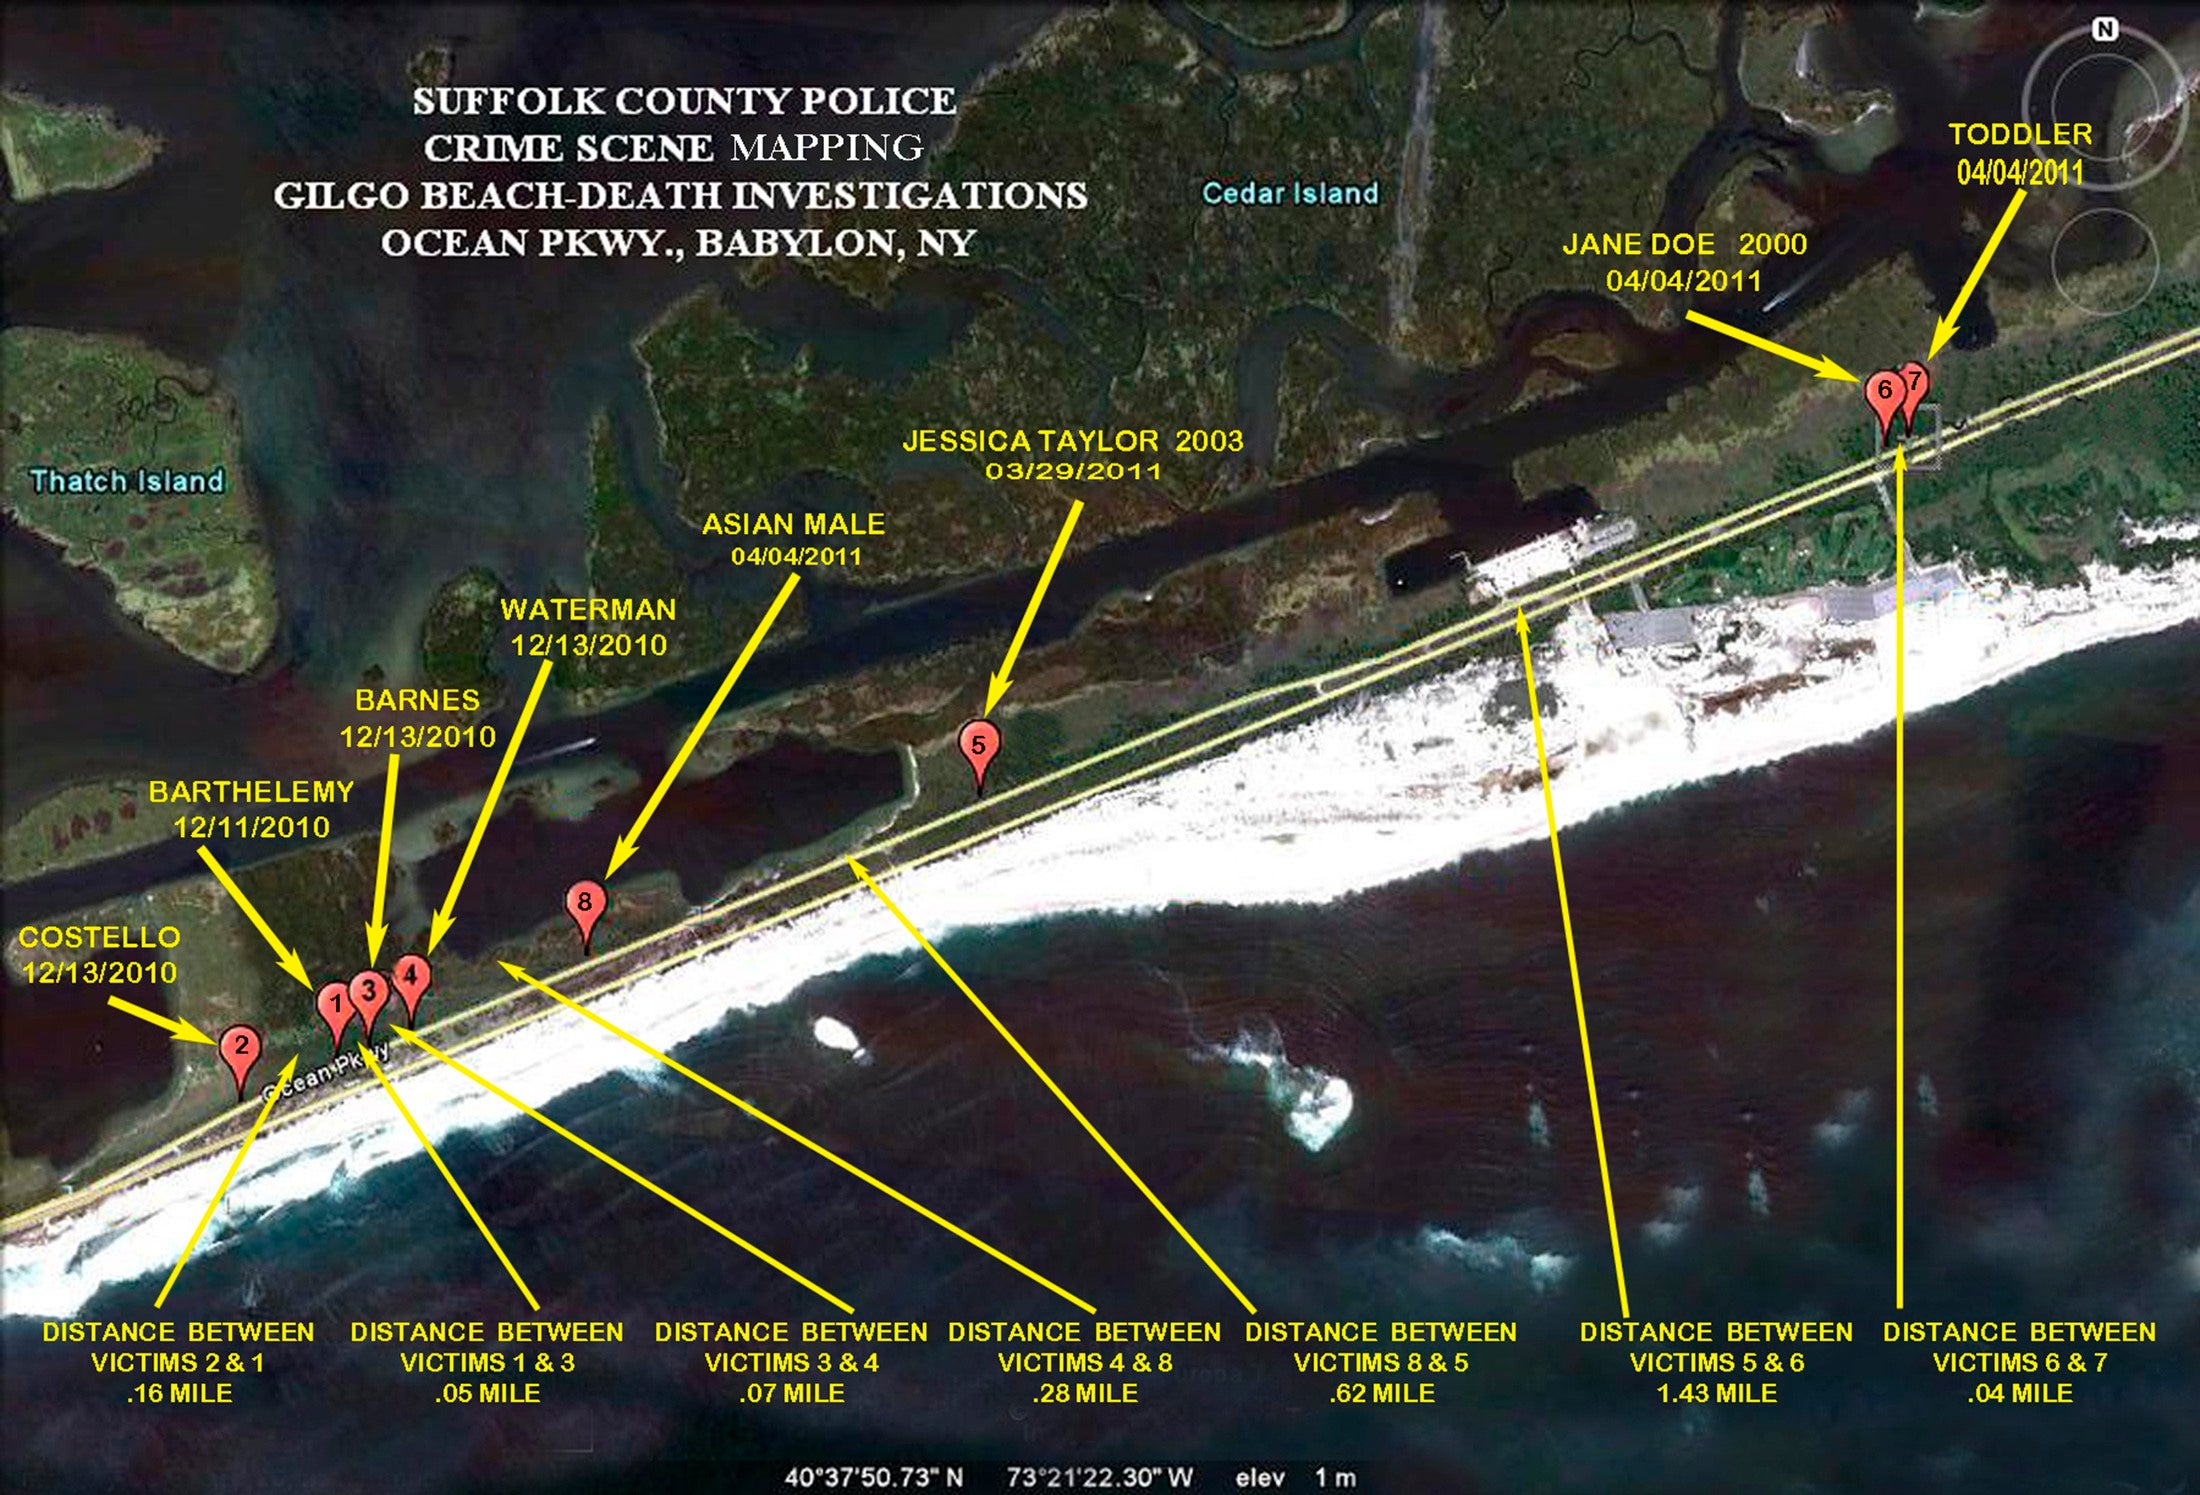 A map shows the location of 10 victims’ remains found along Gilgo Beach since 2010